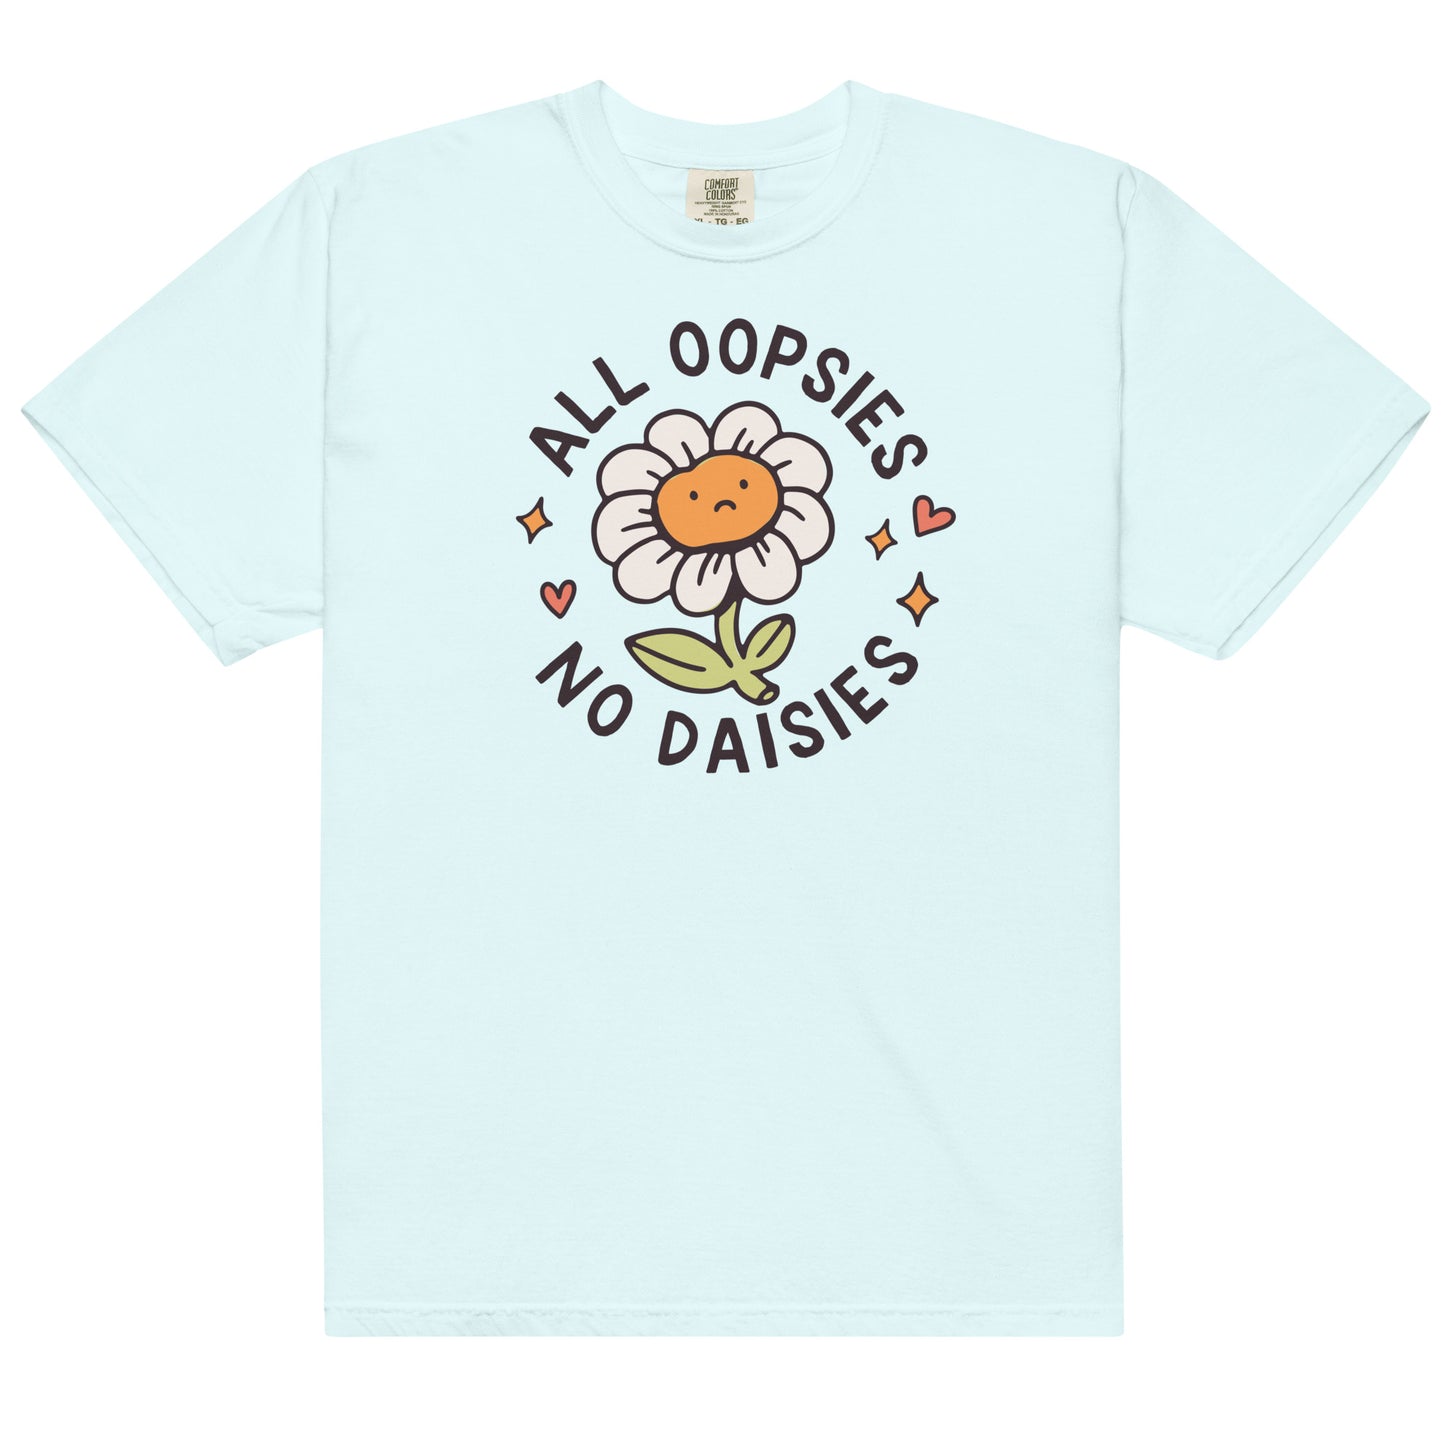 All Oopsies No Daises Unisex t-shirt